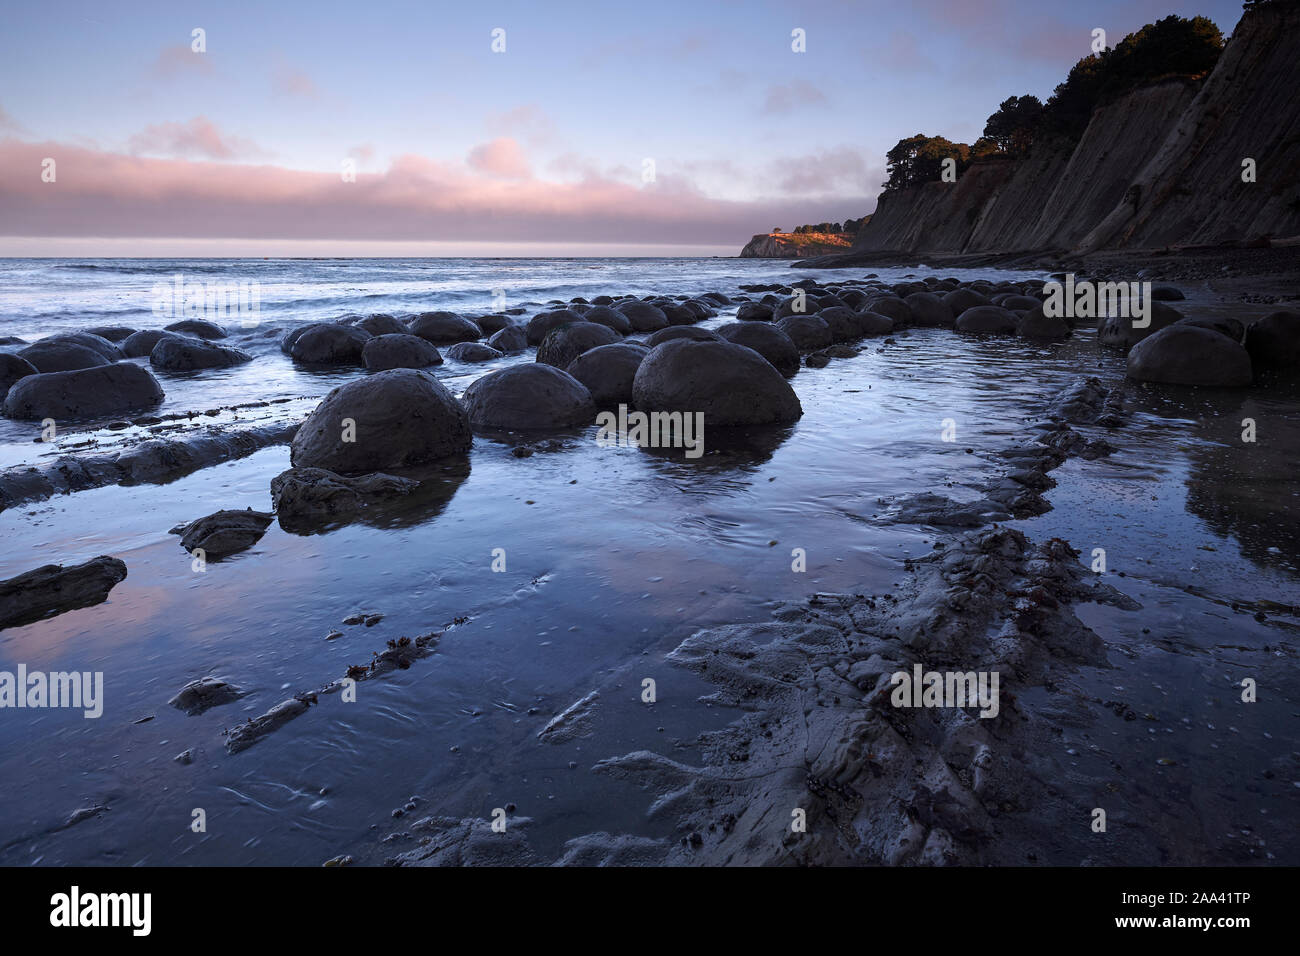 Rock formations in the Pacific Ocean at Bowling Ball Beach, California, USA Stock Photo